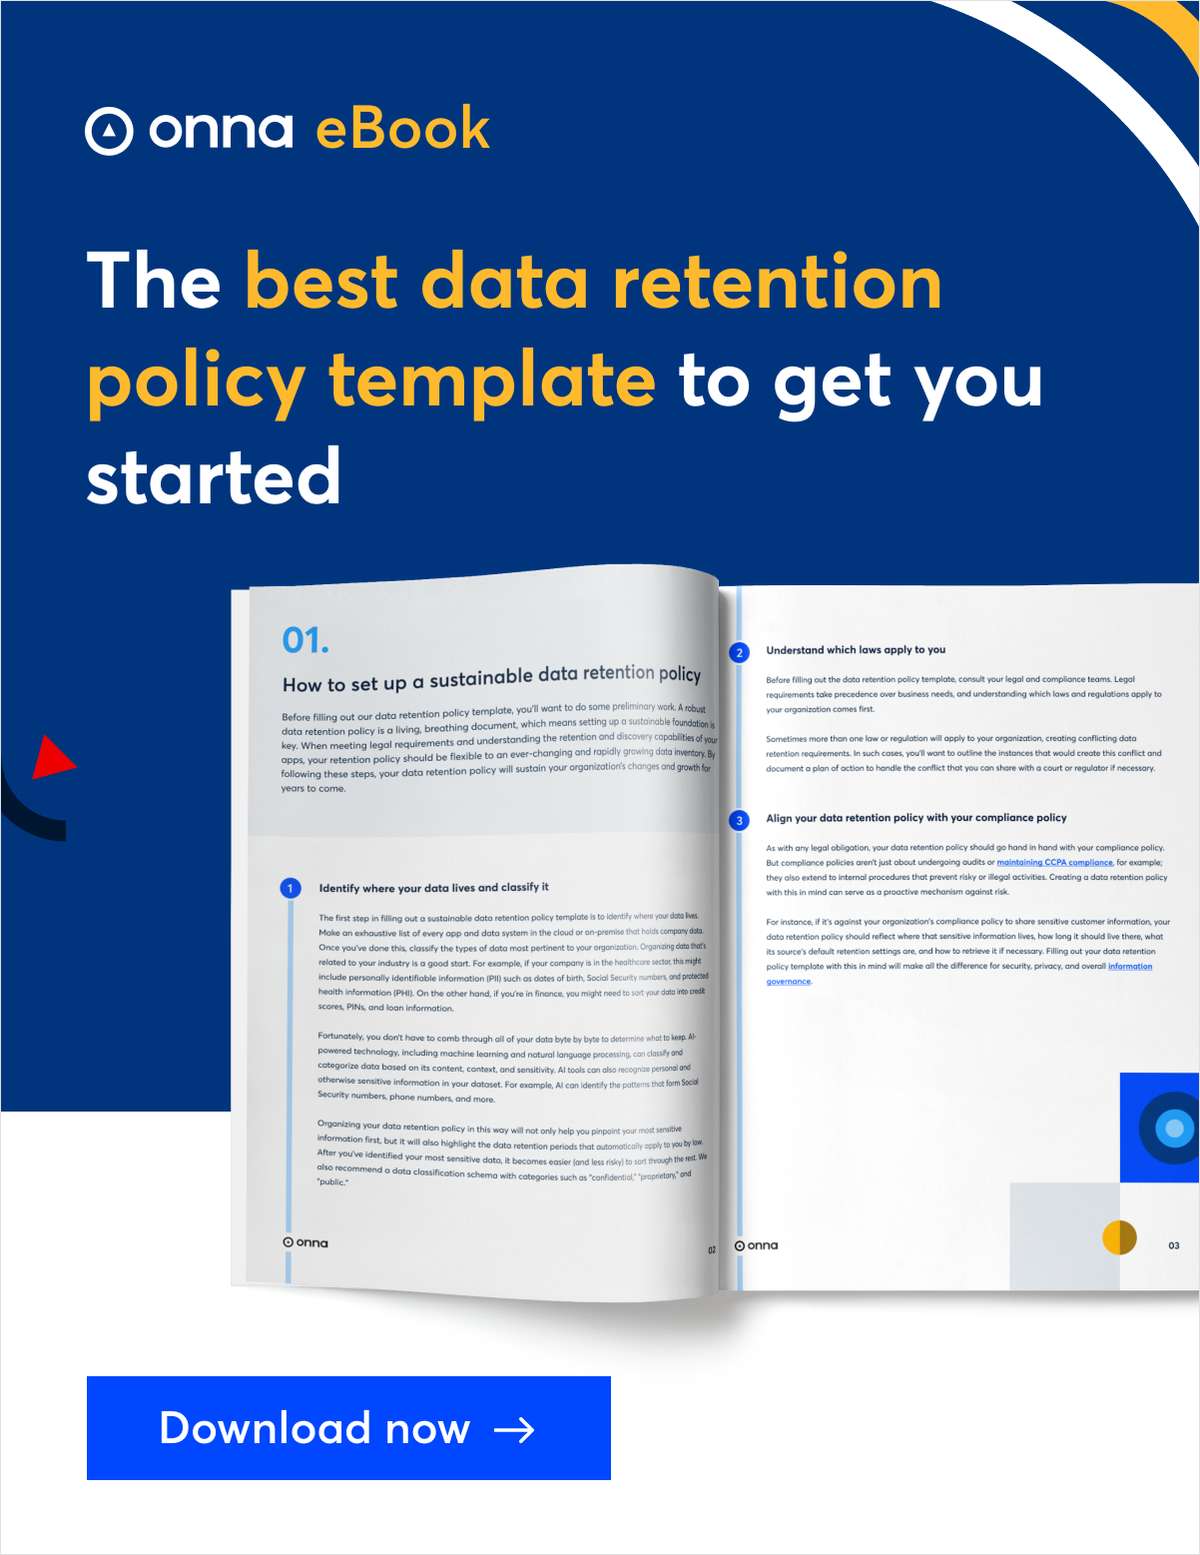 The best data retention policy template to get you started